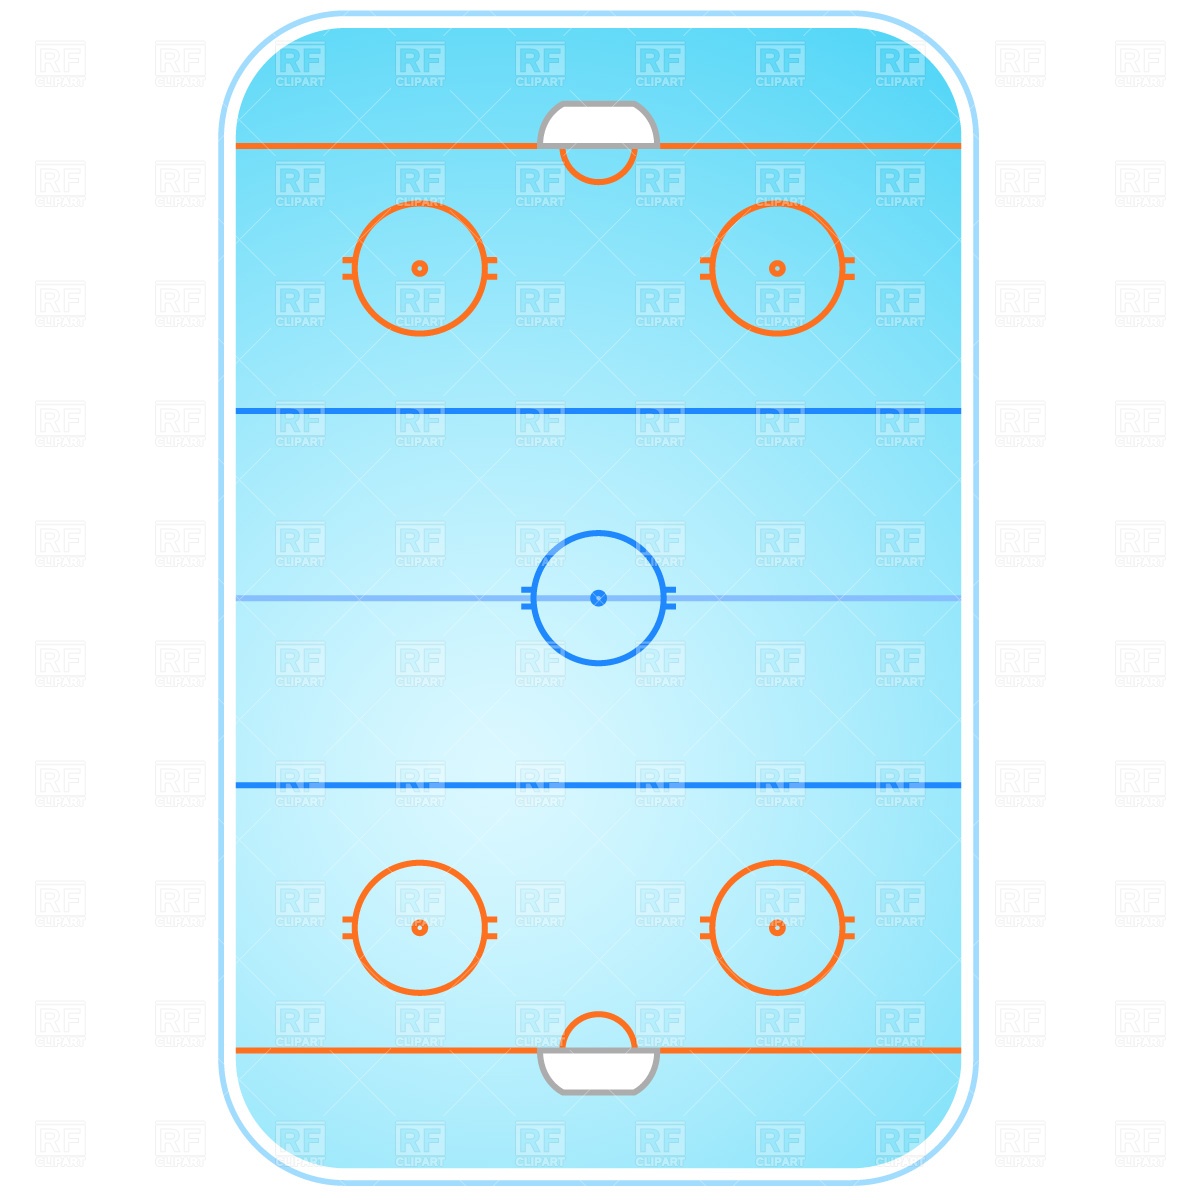 Ice Hockey Rink Layout 809 Sport And Leisure Download Royalty Free